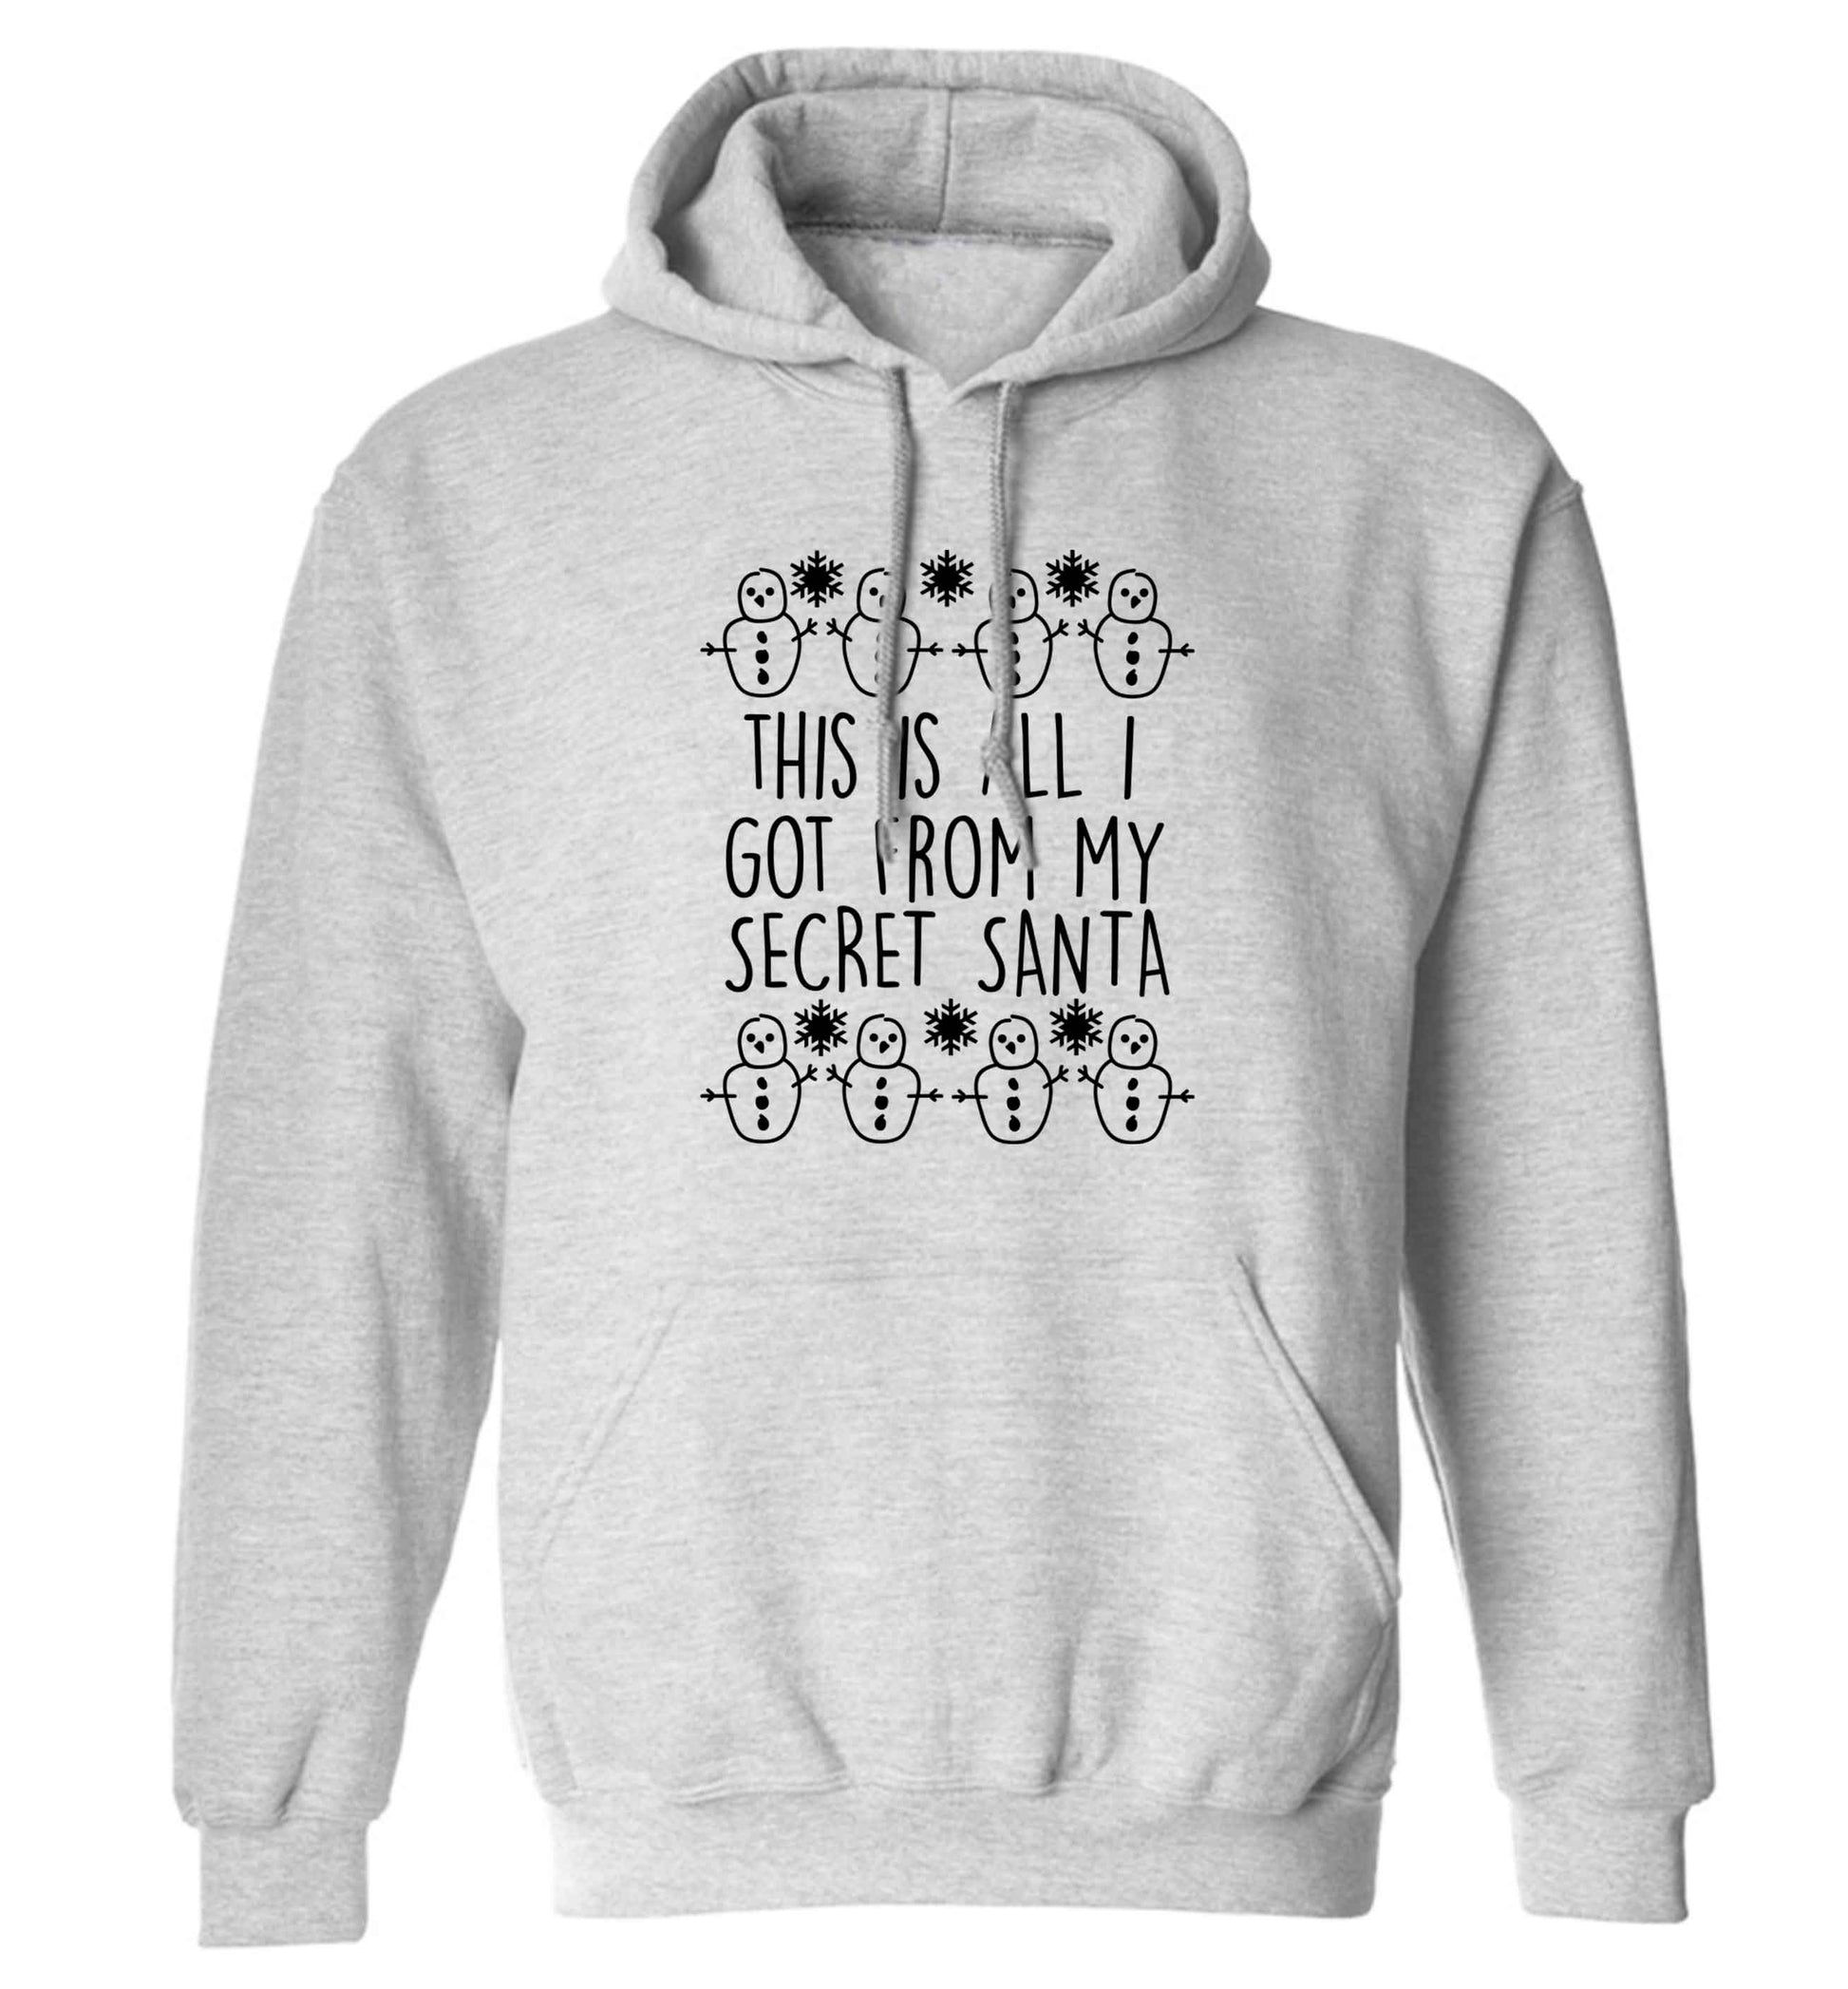 This is all I got from my secret Santa adults unisex grey hoodie 2XL